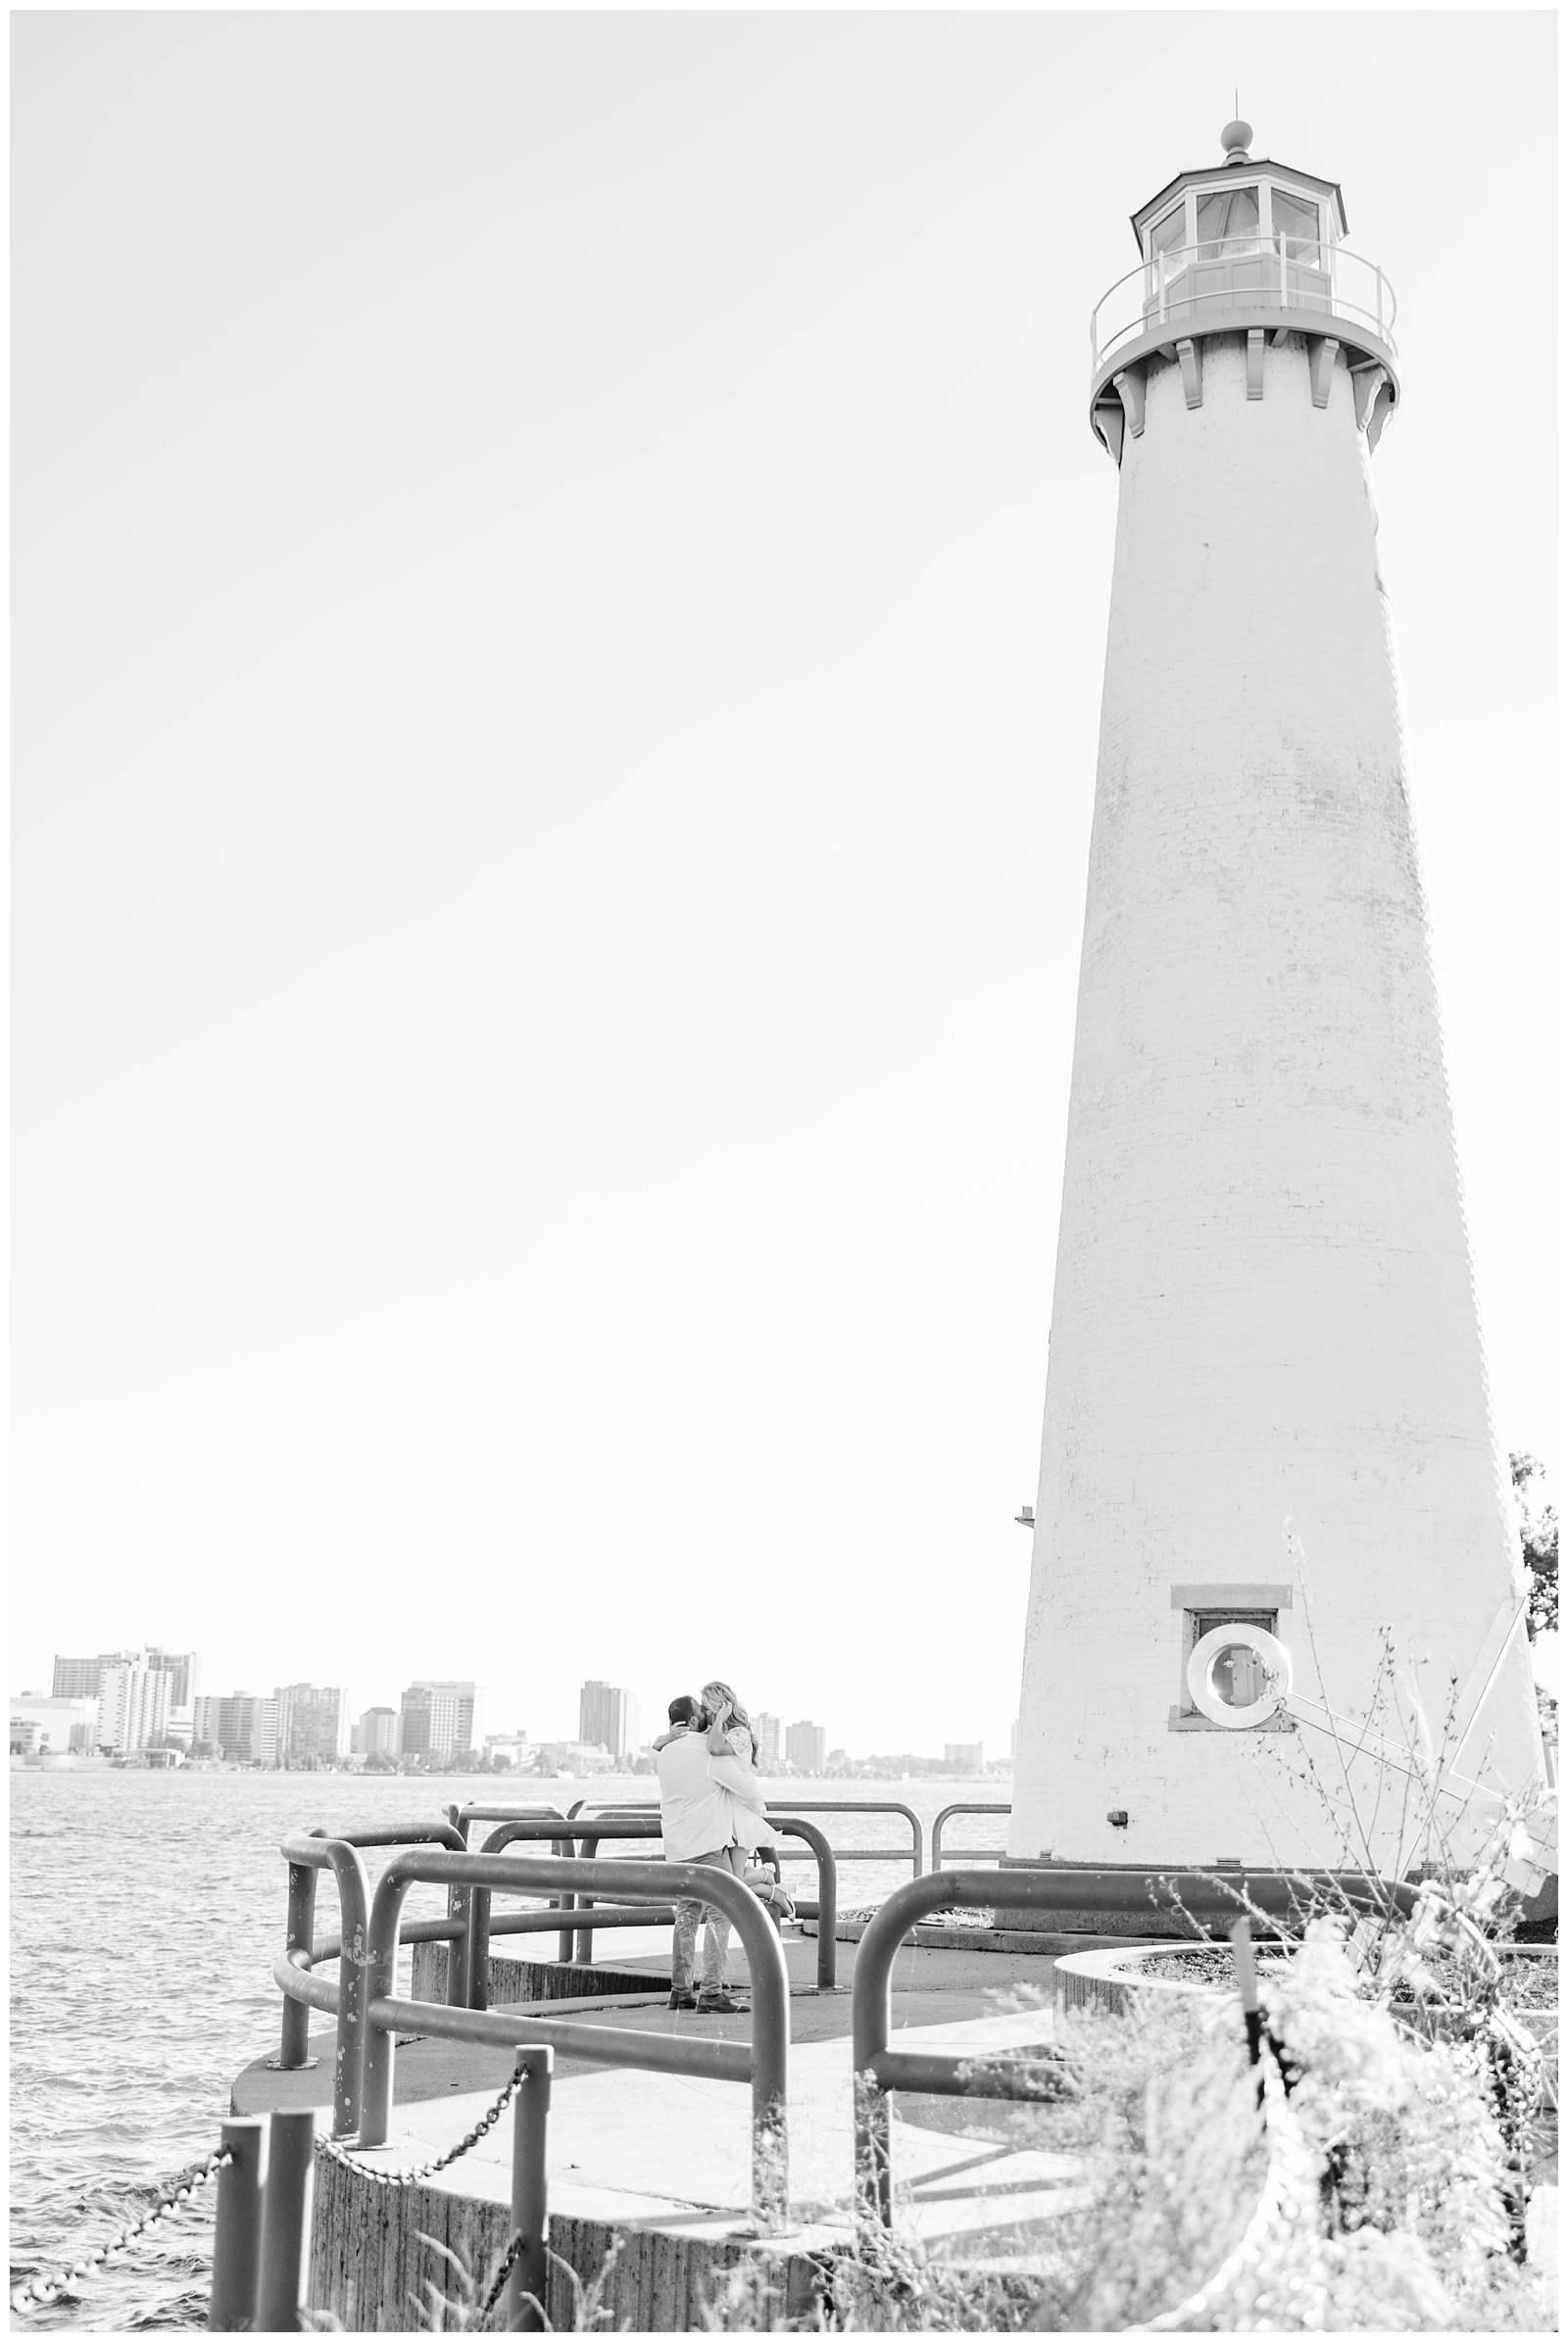 Engagement photos with lighthouse